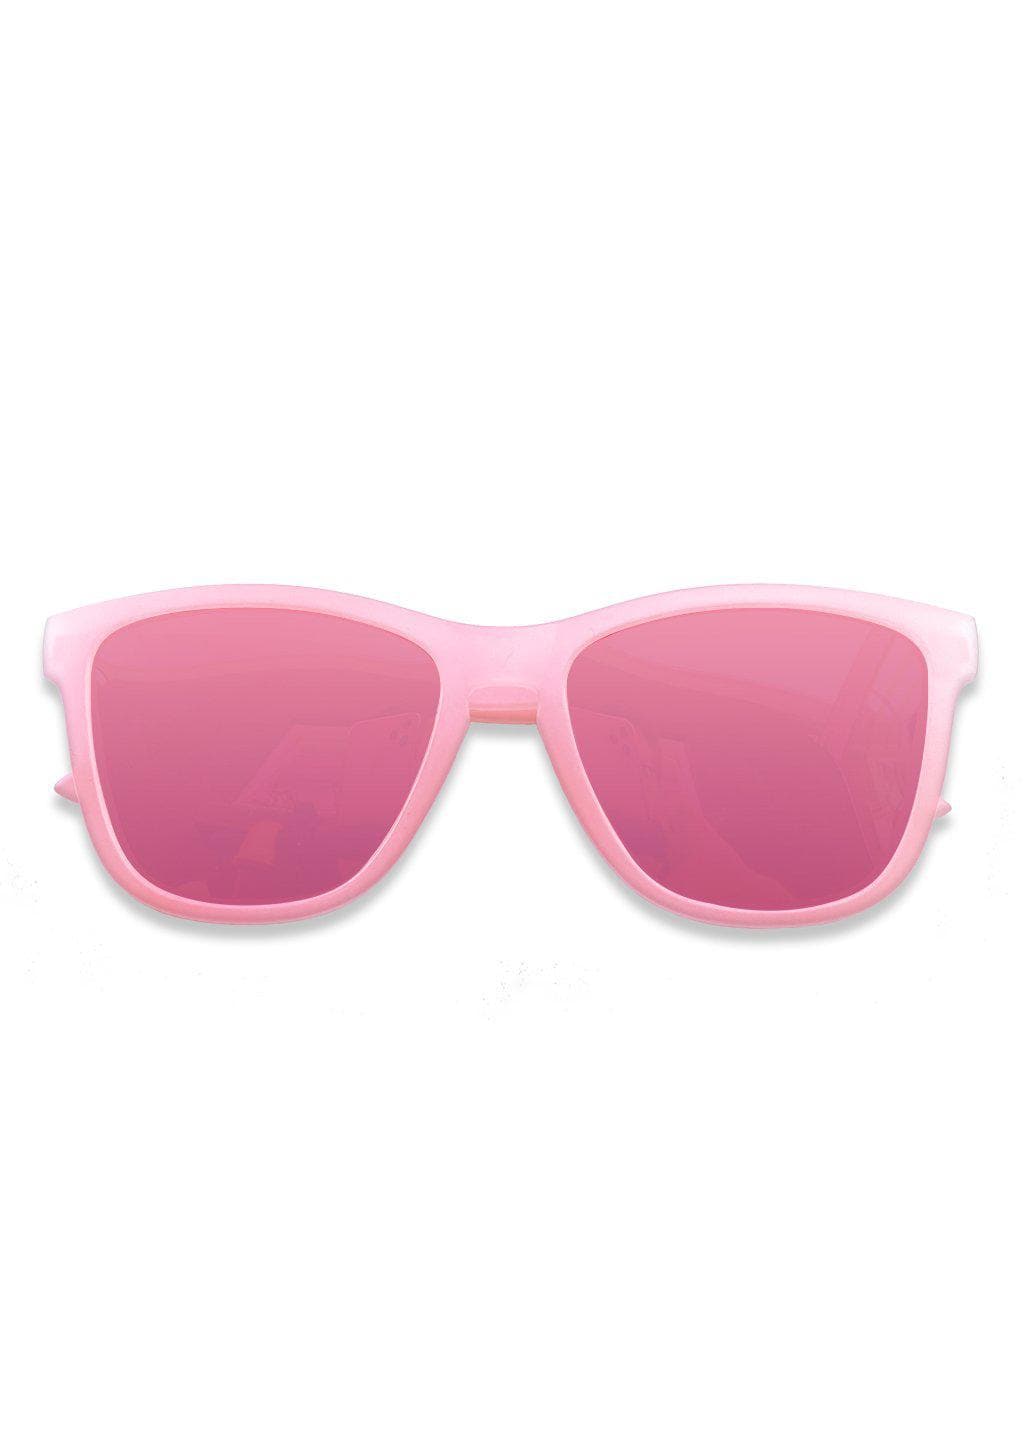 Our Mood V2 is an improved version of our last wayfarers. Plastic body for great quality and durabilty. This is Flamingo with a pink transparent frame and pink mirror lenses. From the front.